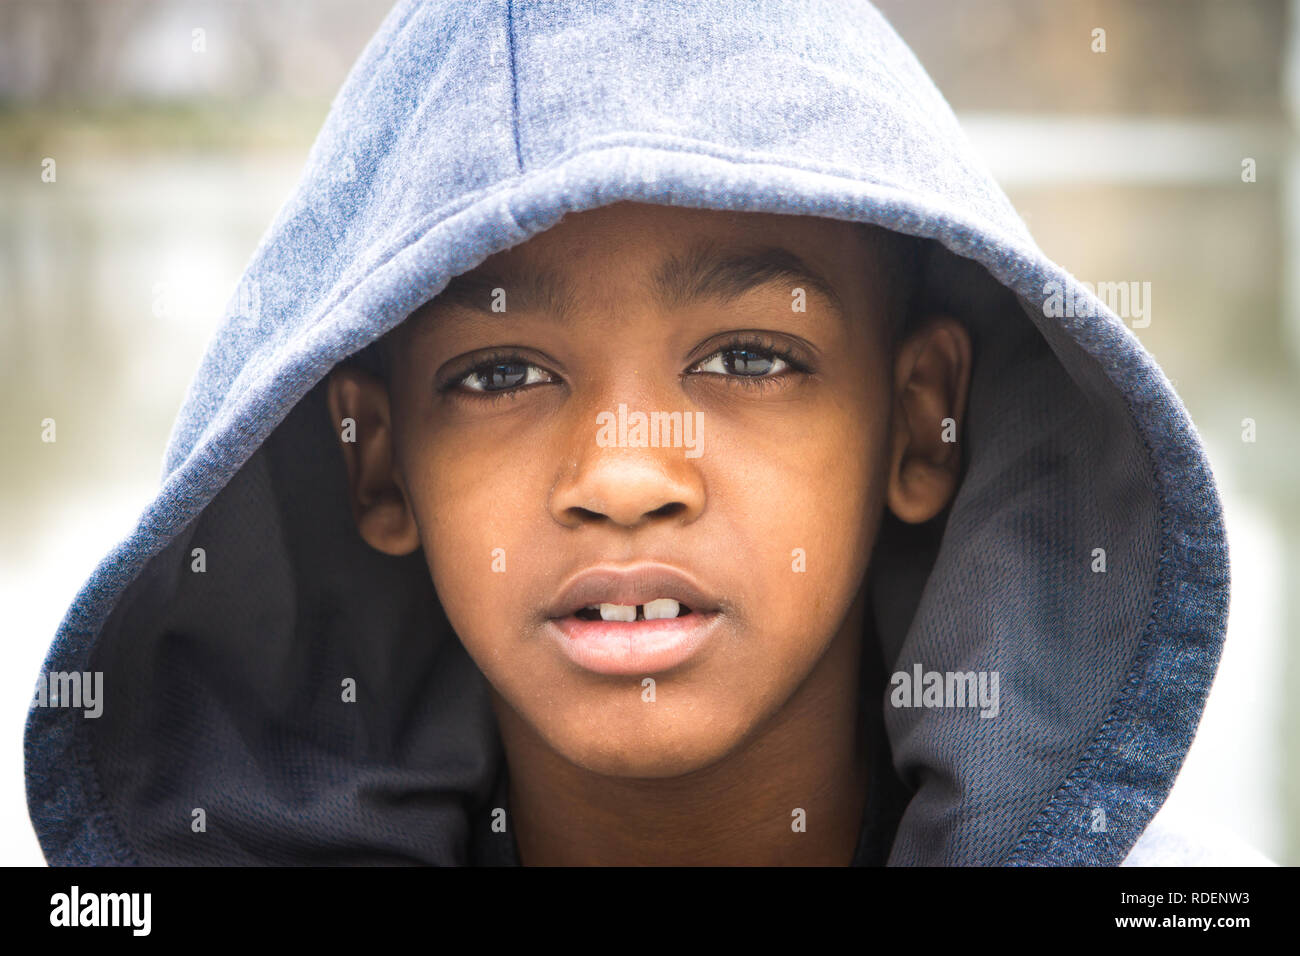 Close up of African American boy outside Stock Photo